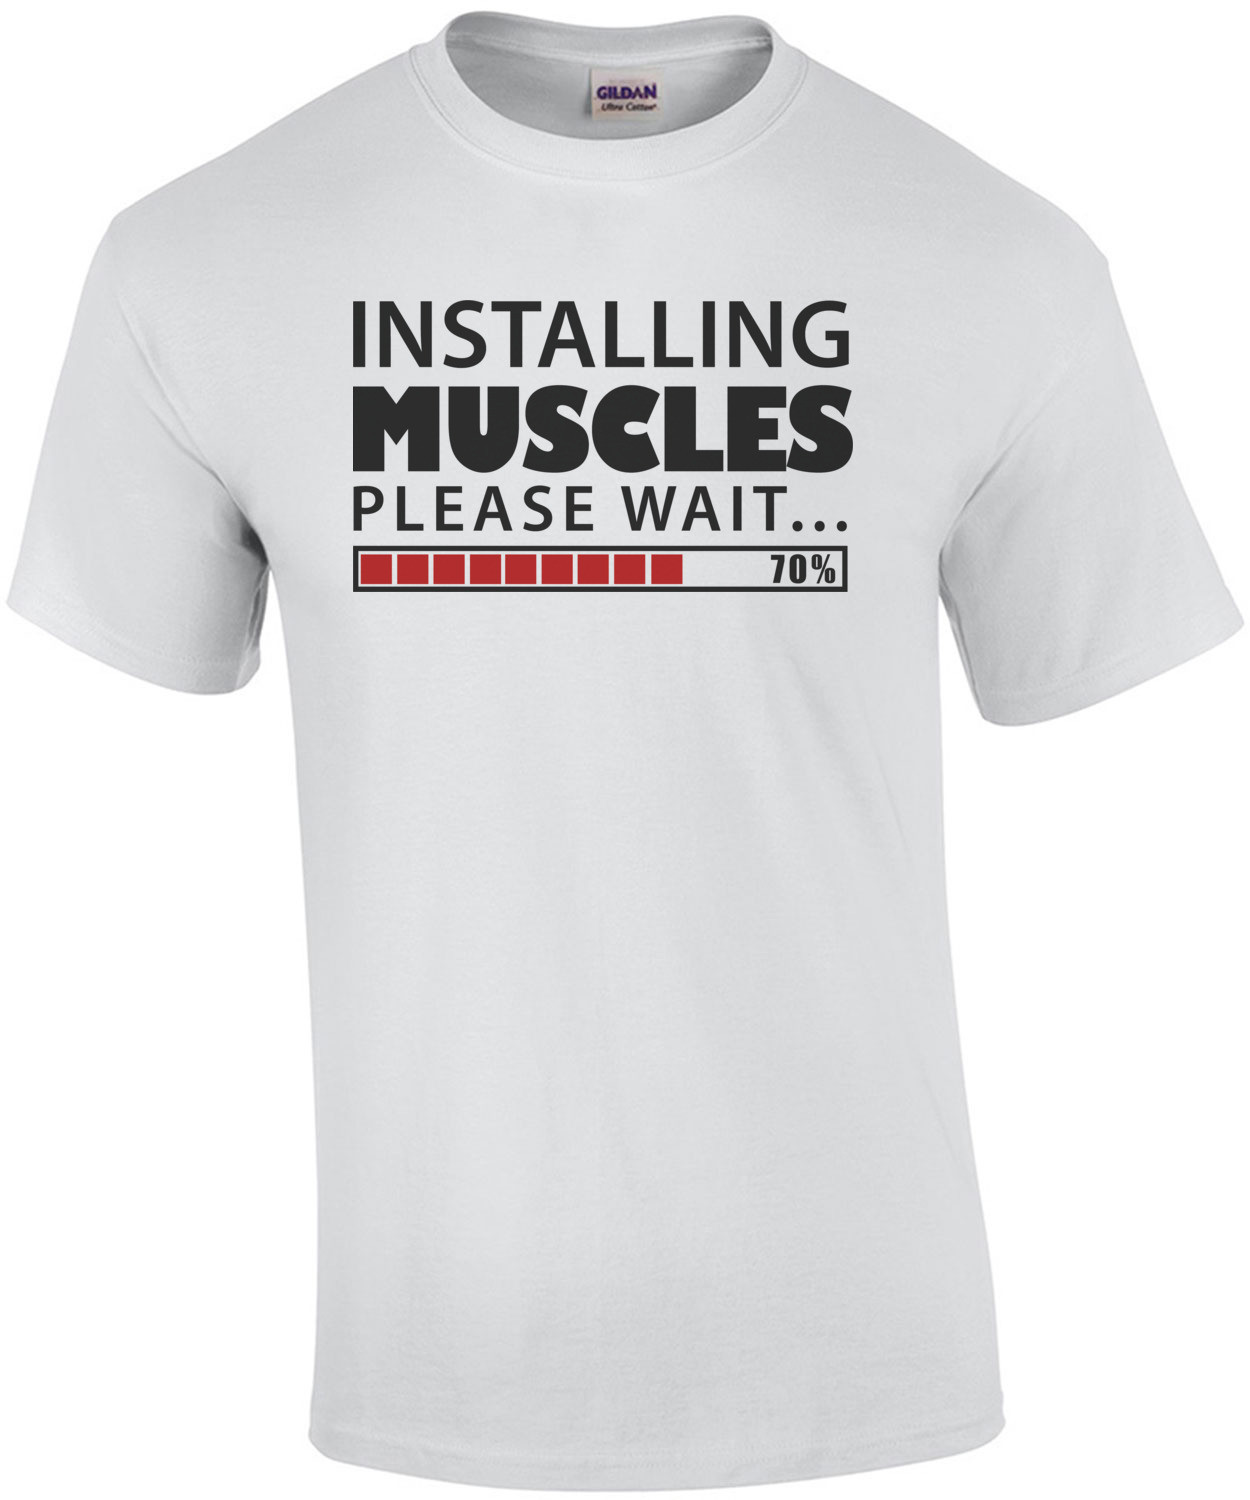 Installing Muscles. Please Wait. Funny Work Out T-Shirt